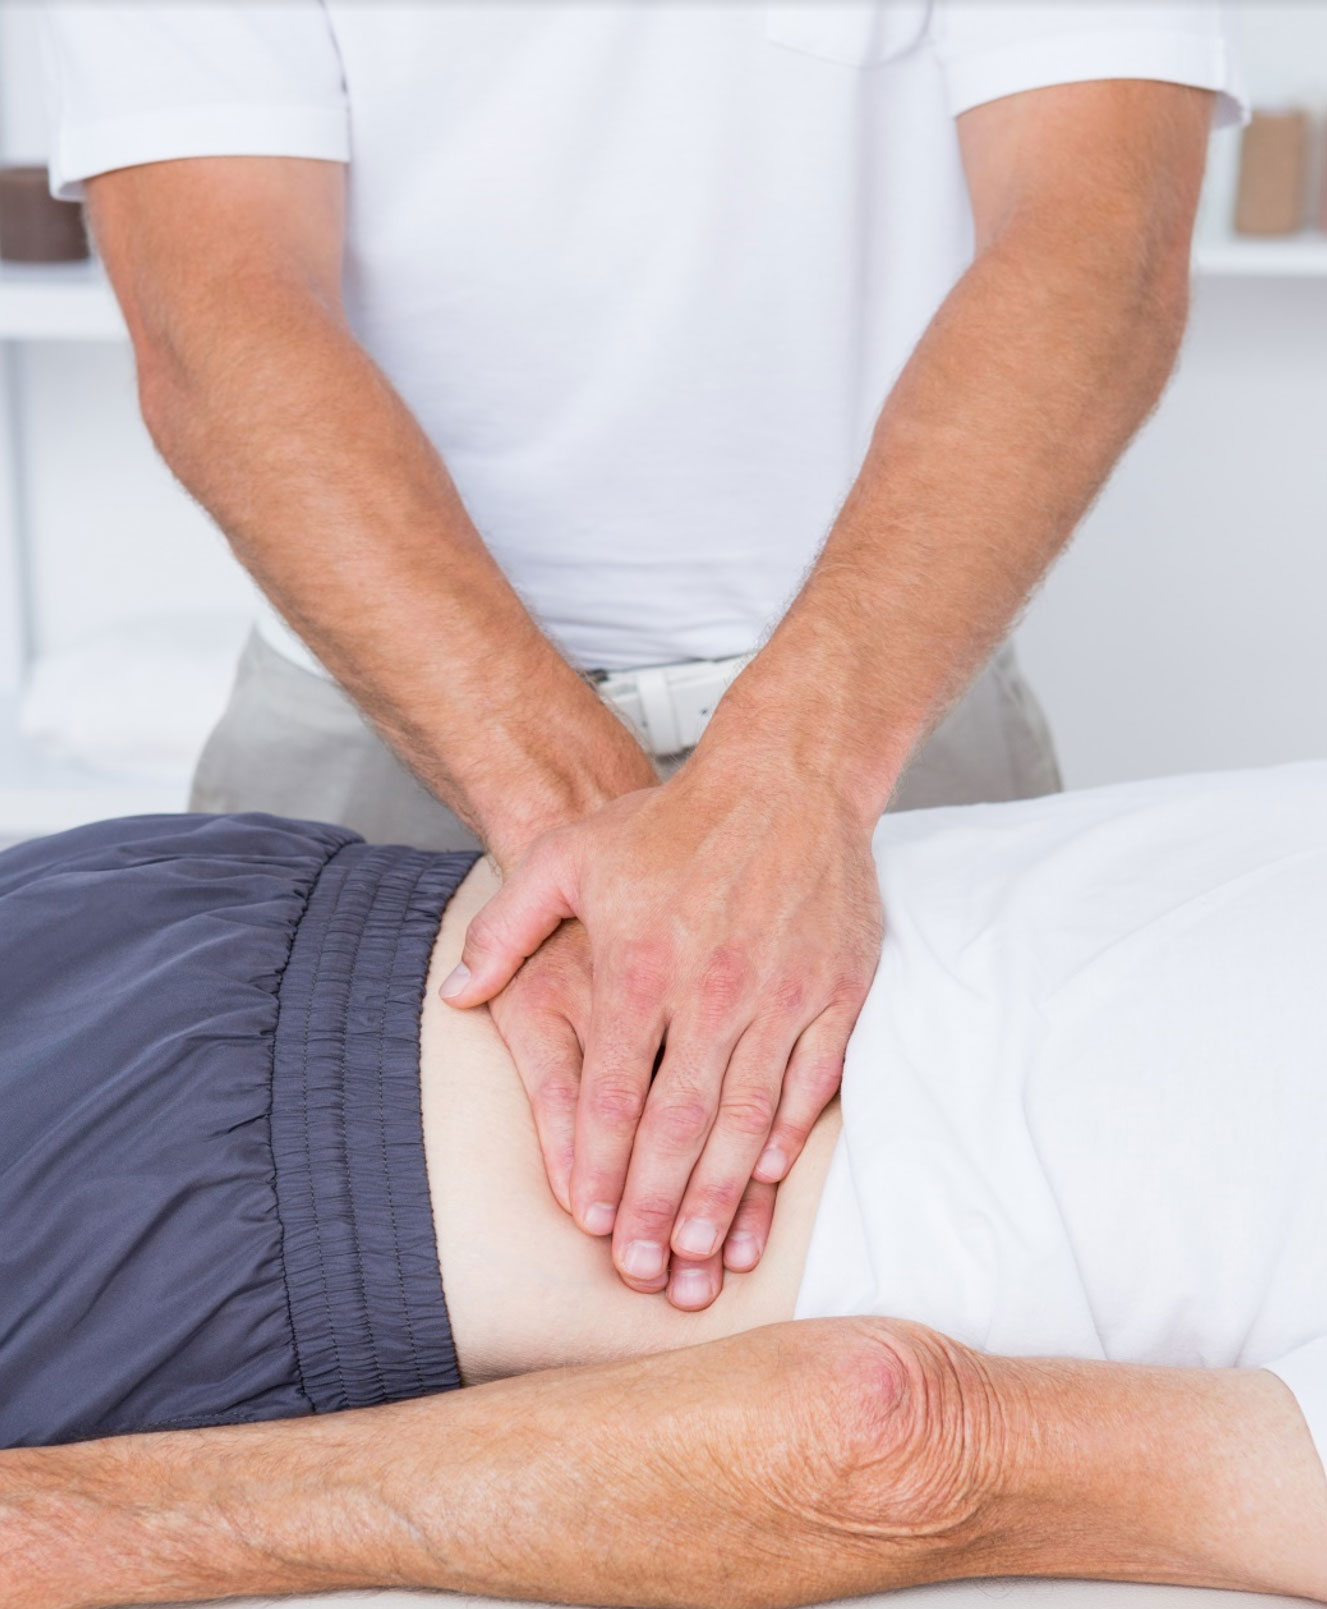 Pain management at home